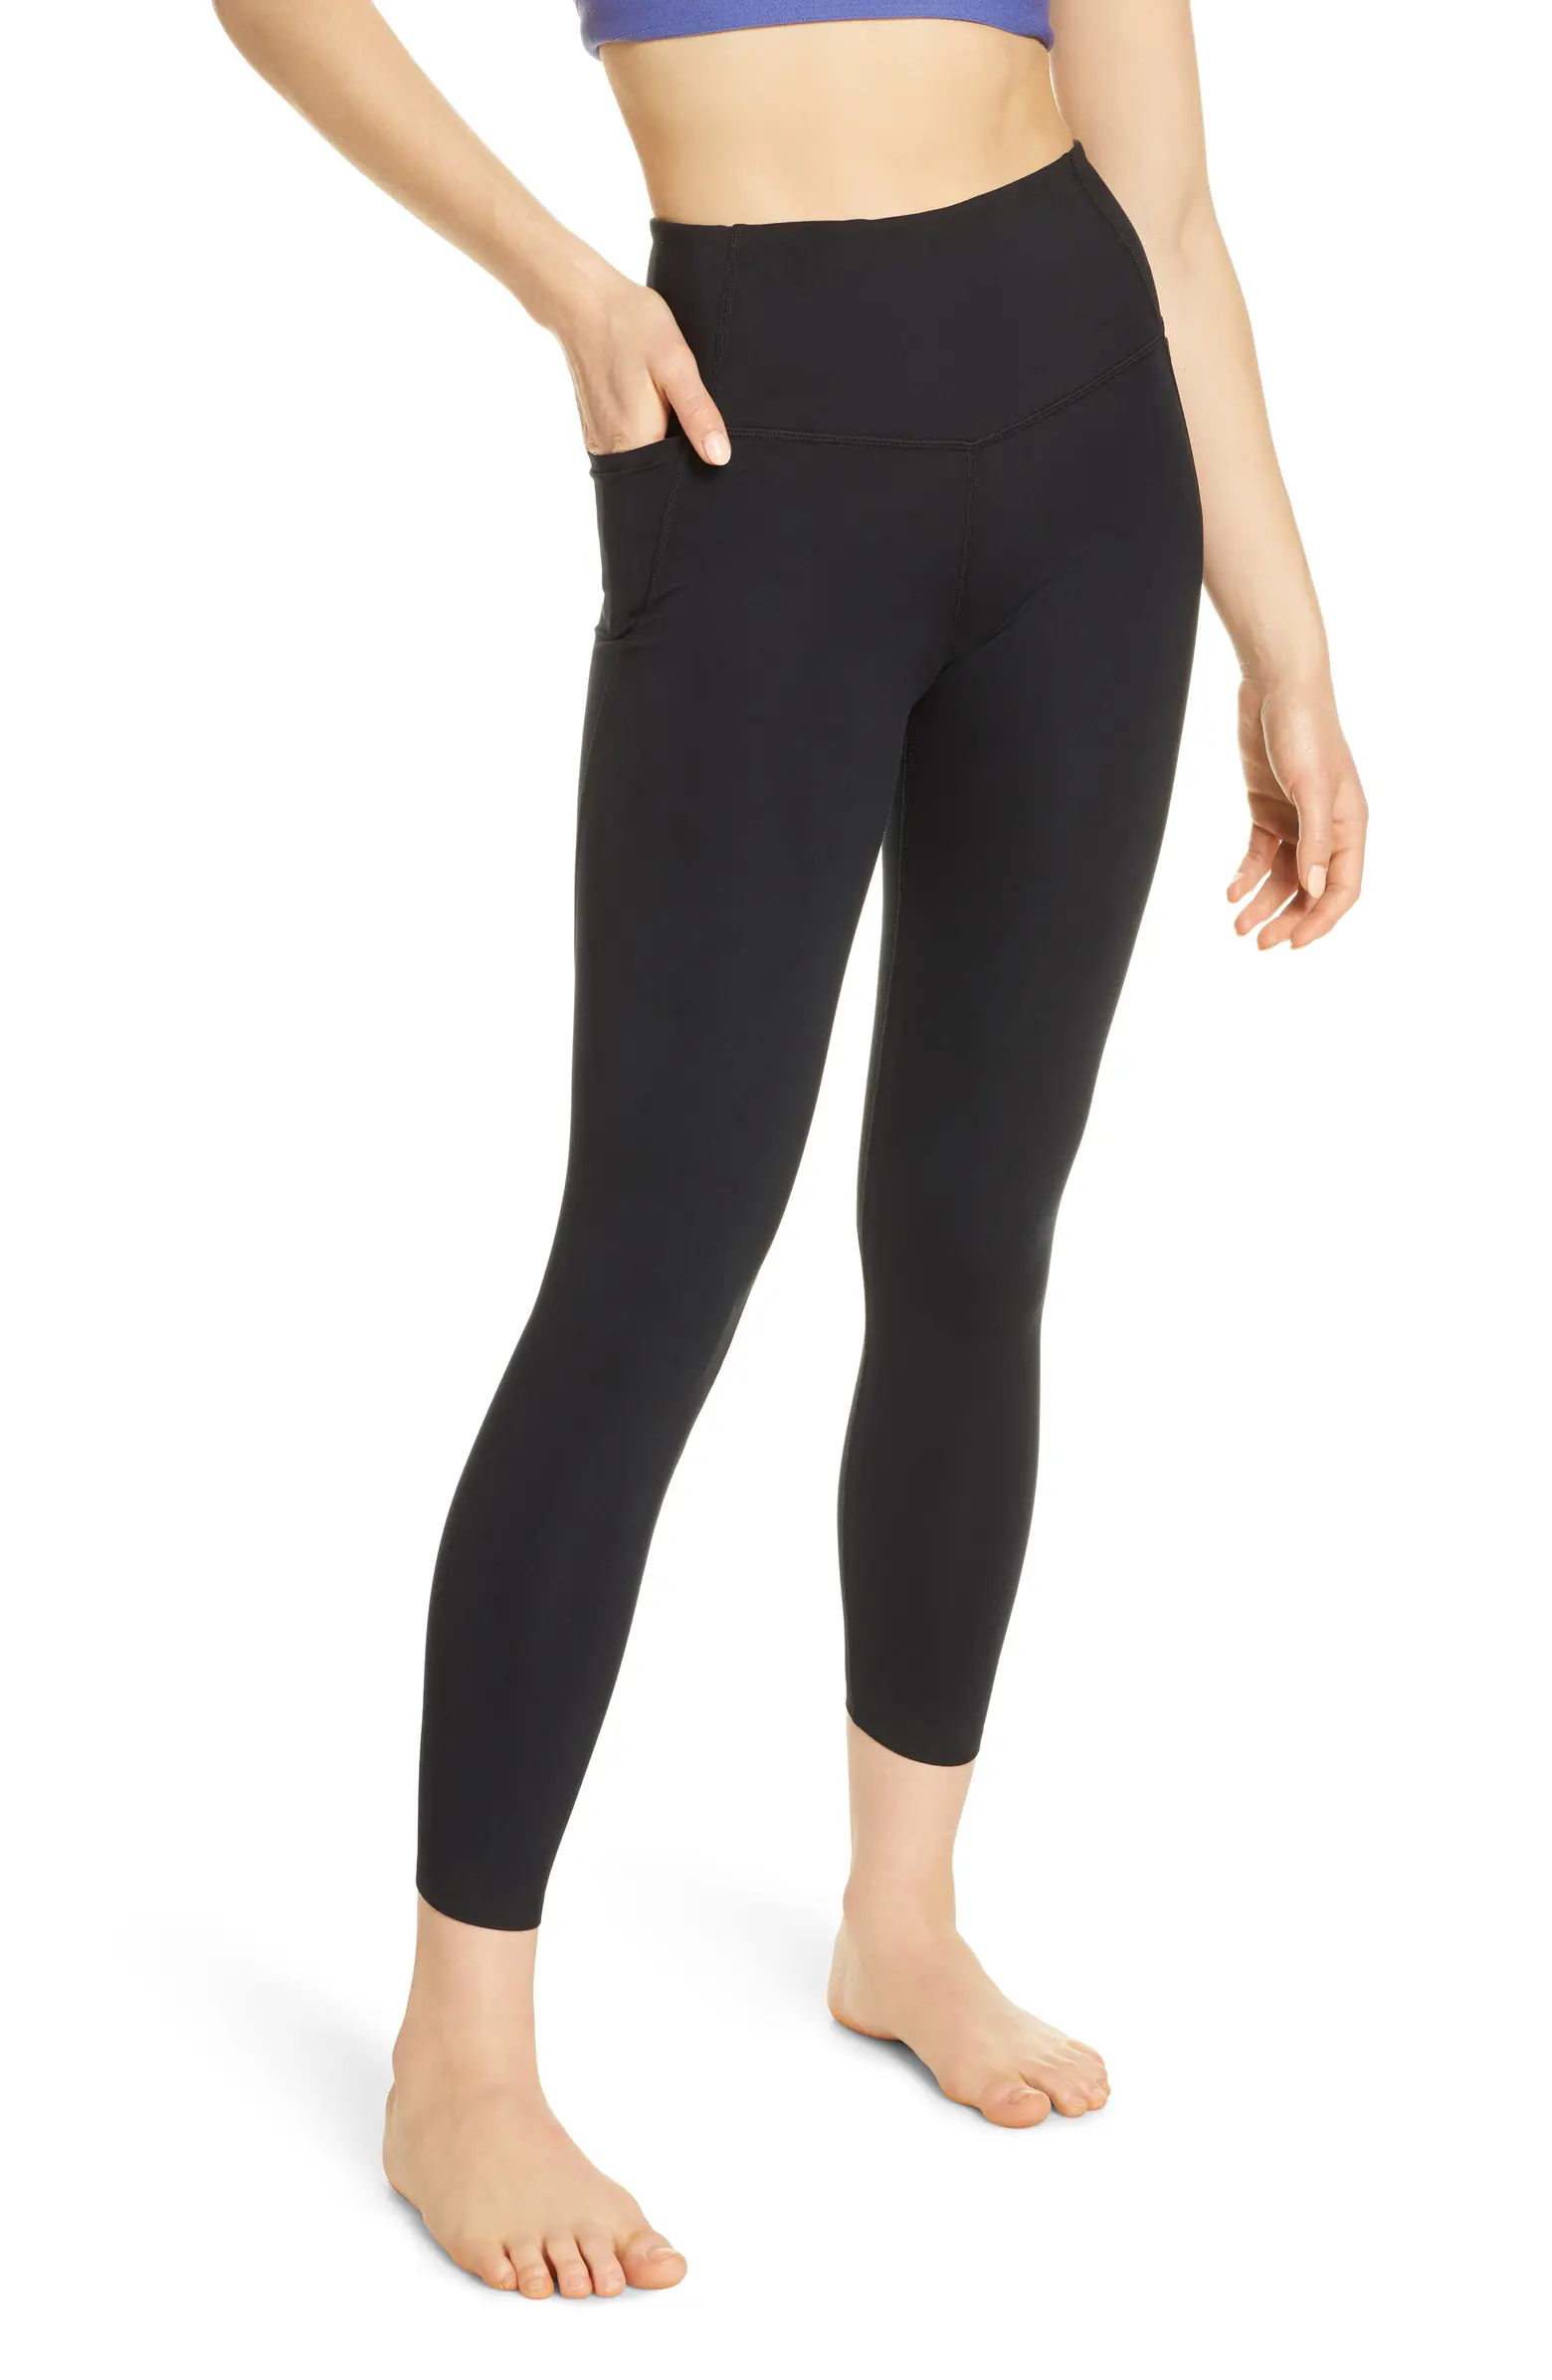 women's workout pants with side pockets